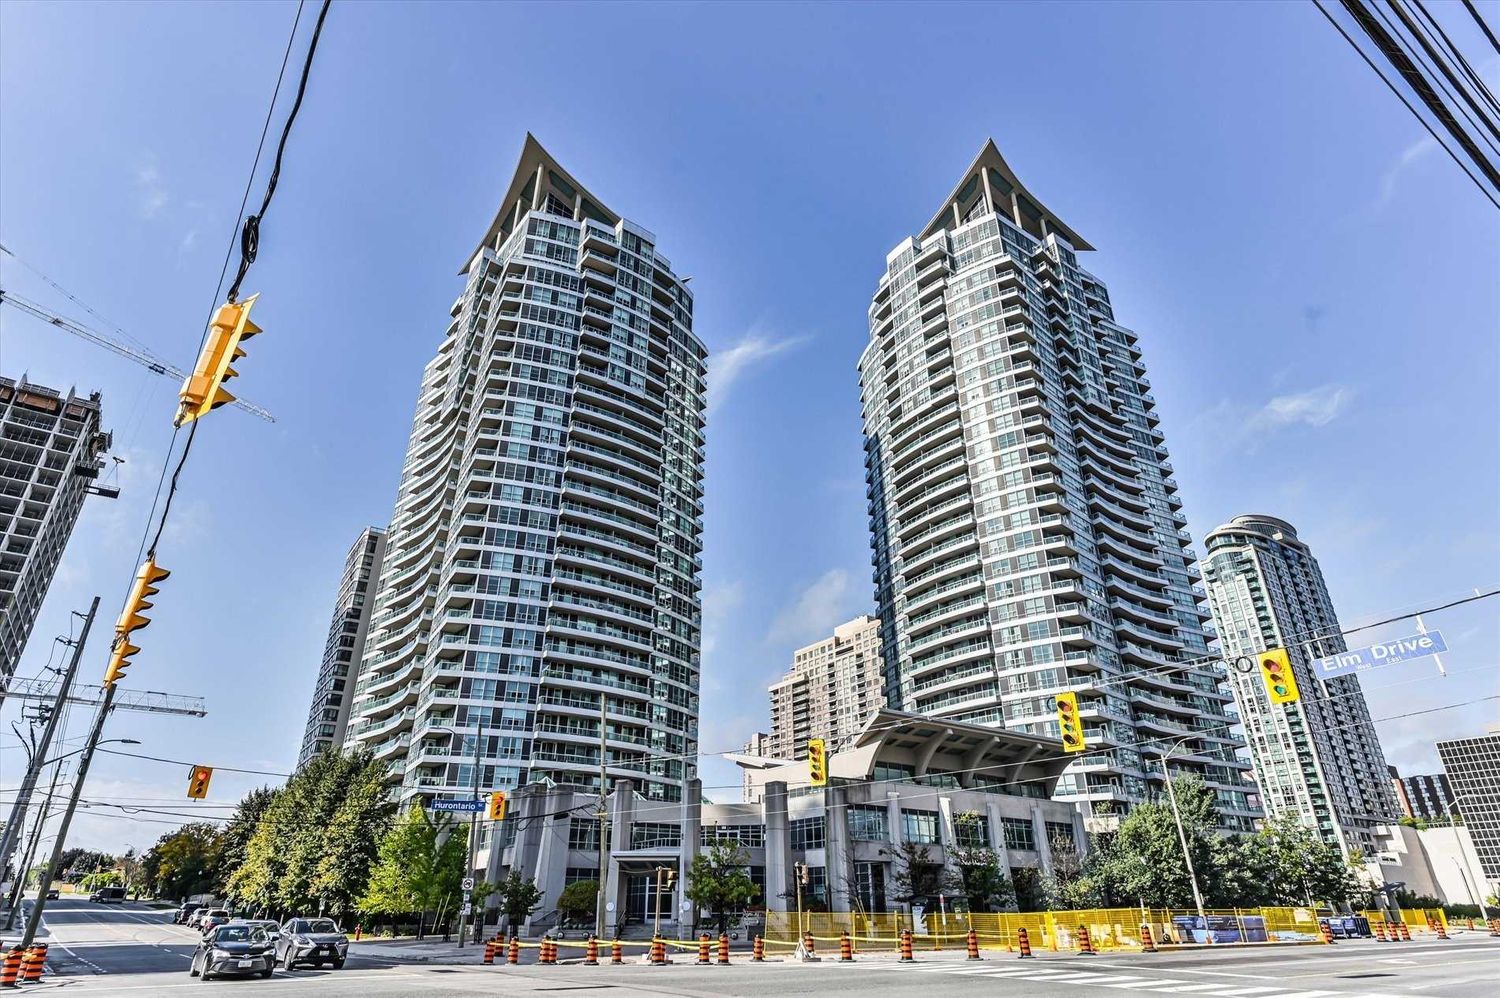 33 Elm Drive W. No 1 City Center Condos is located in  Mississauga, Toronto - image #1 of 2